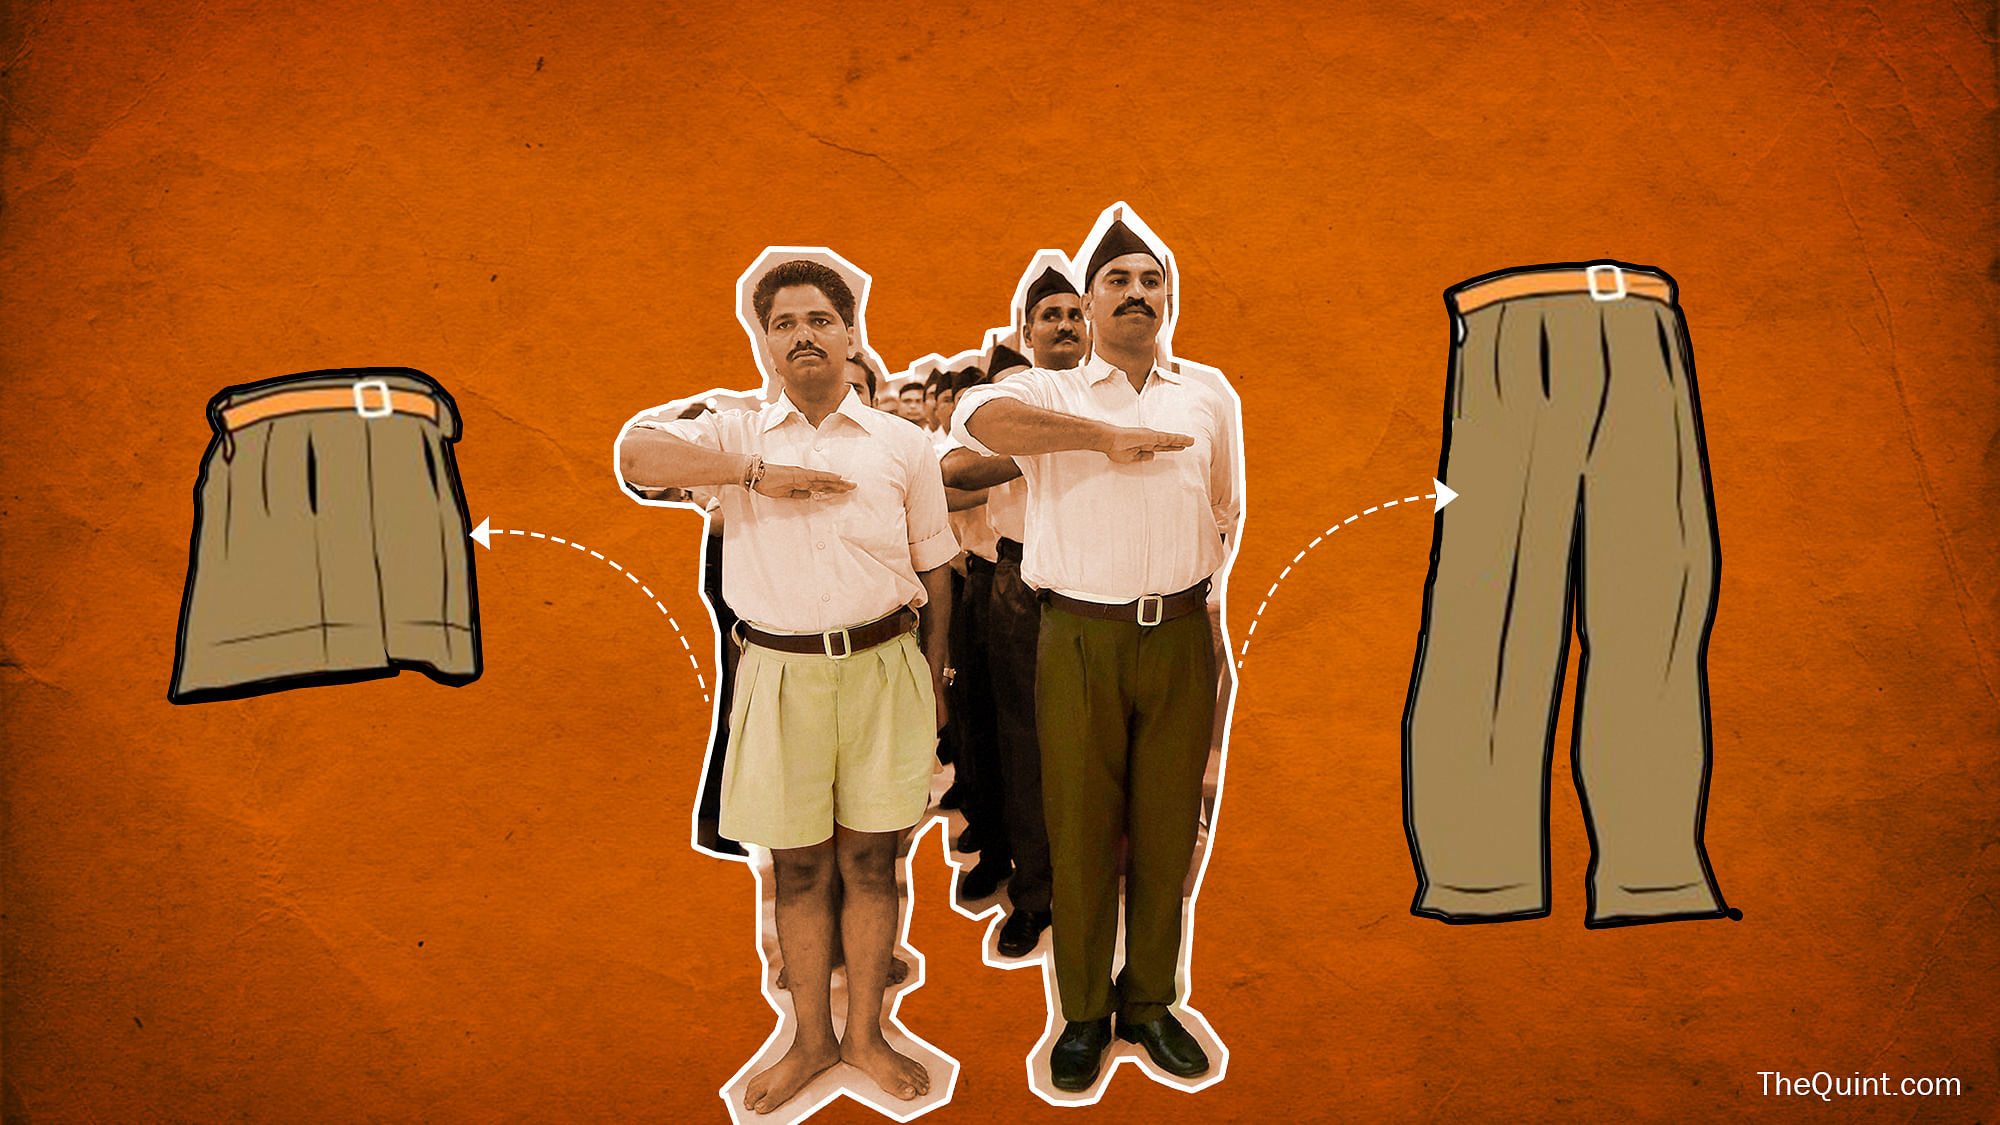 RSS changes uniform from khaki shorts to brown trousers